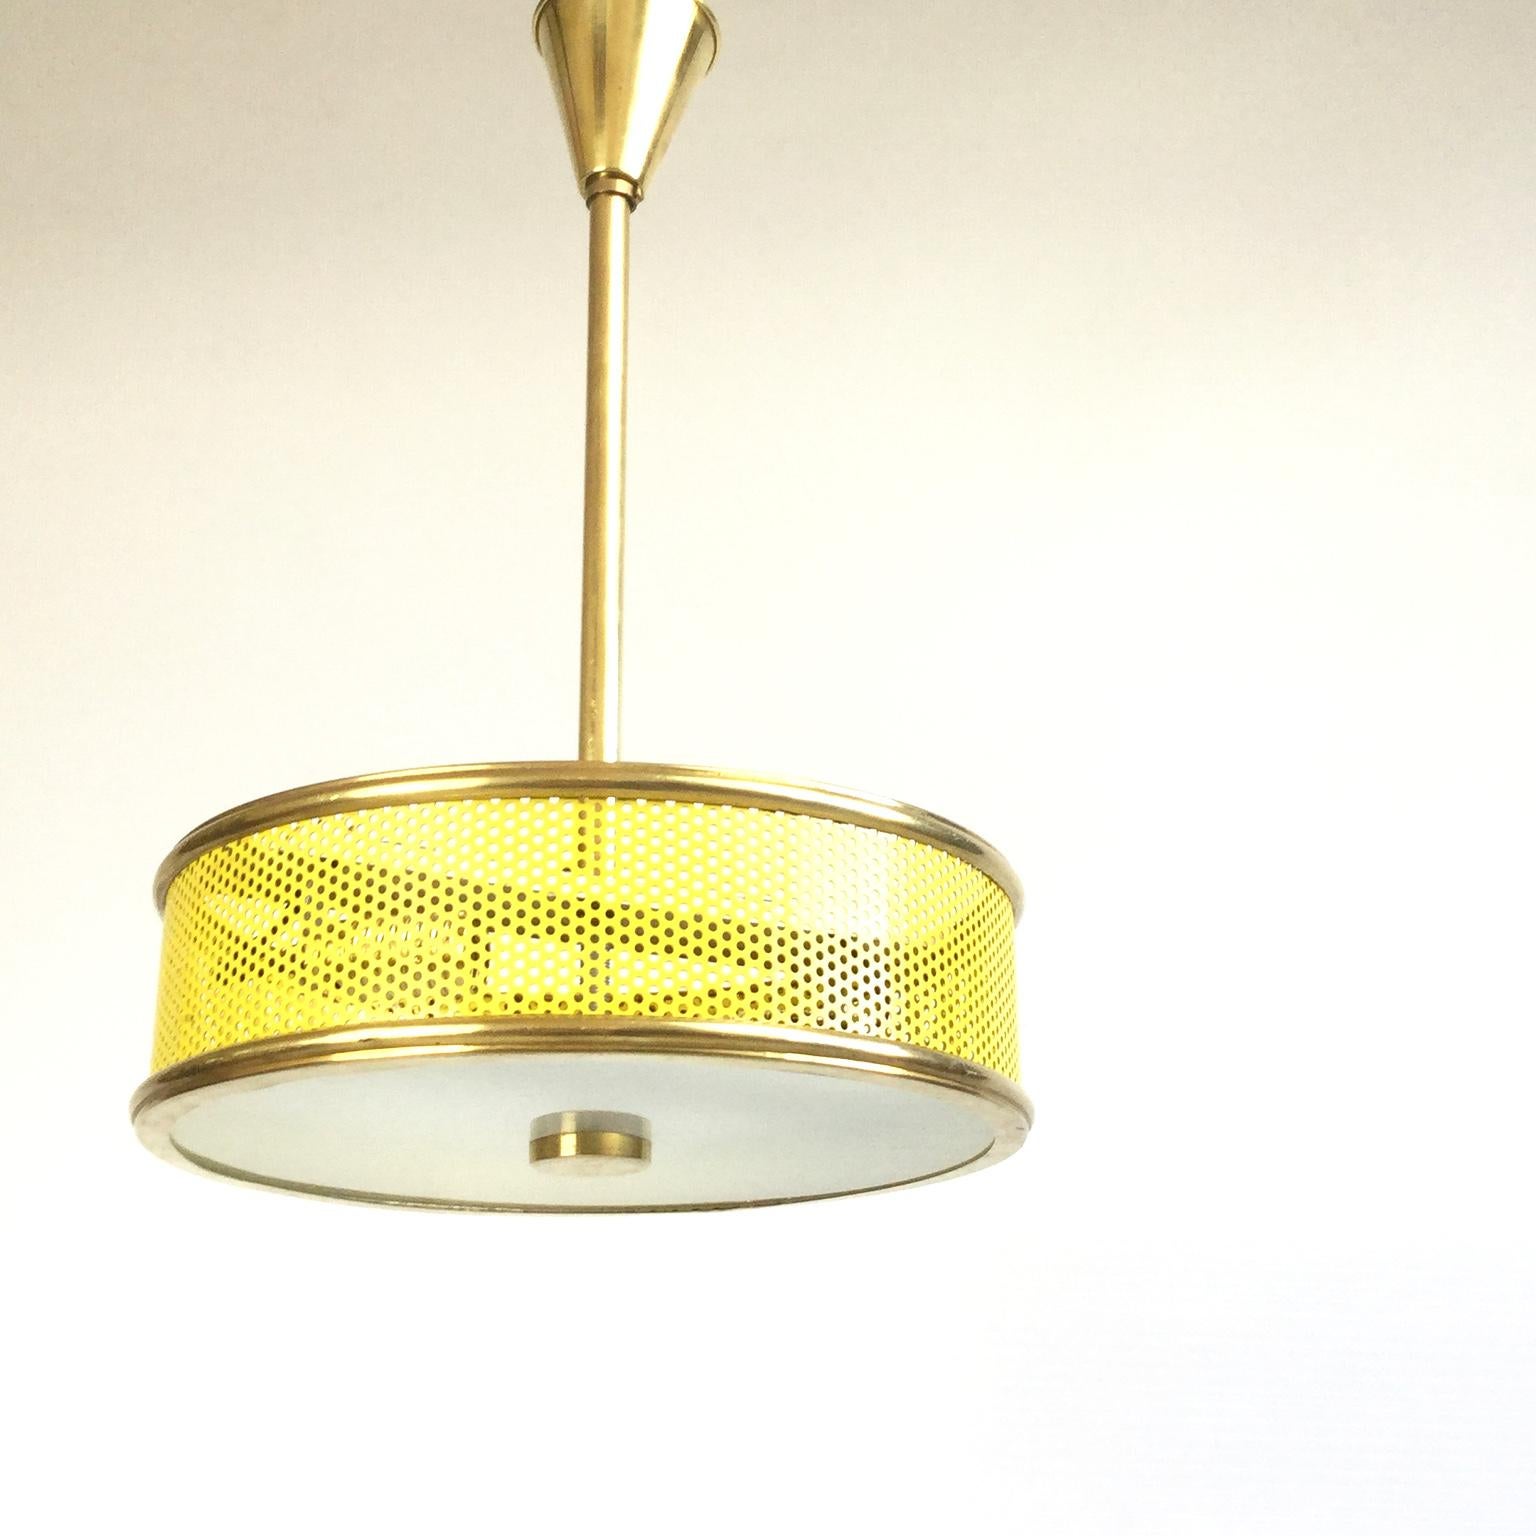 Hanging lamp from the 1950s with a yellow perforated metal lampshade and a frosted glass
Completely rewired with 2 lamp sockets.